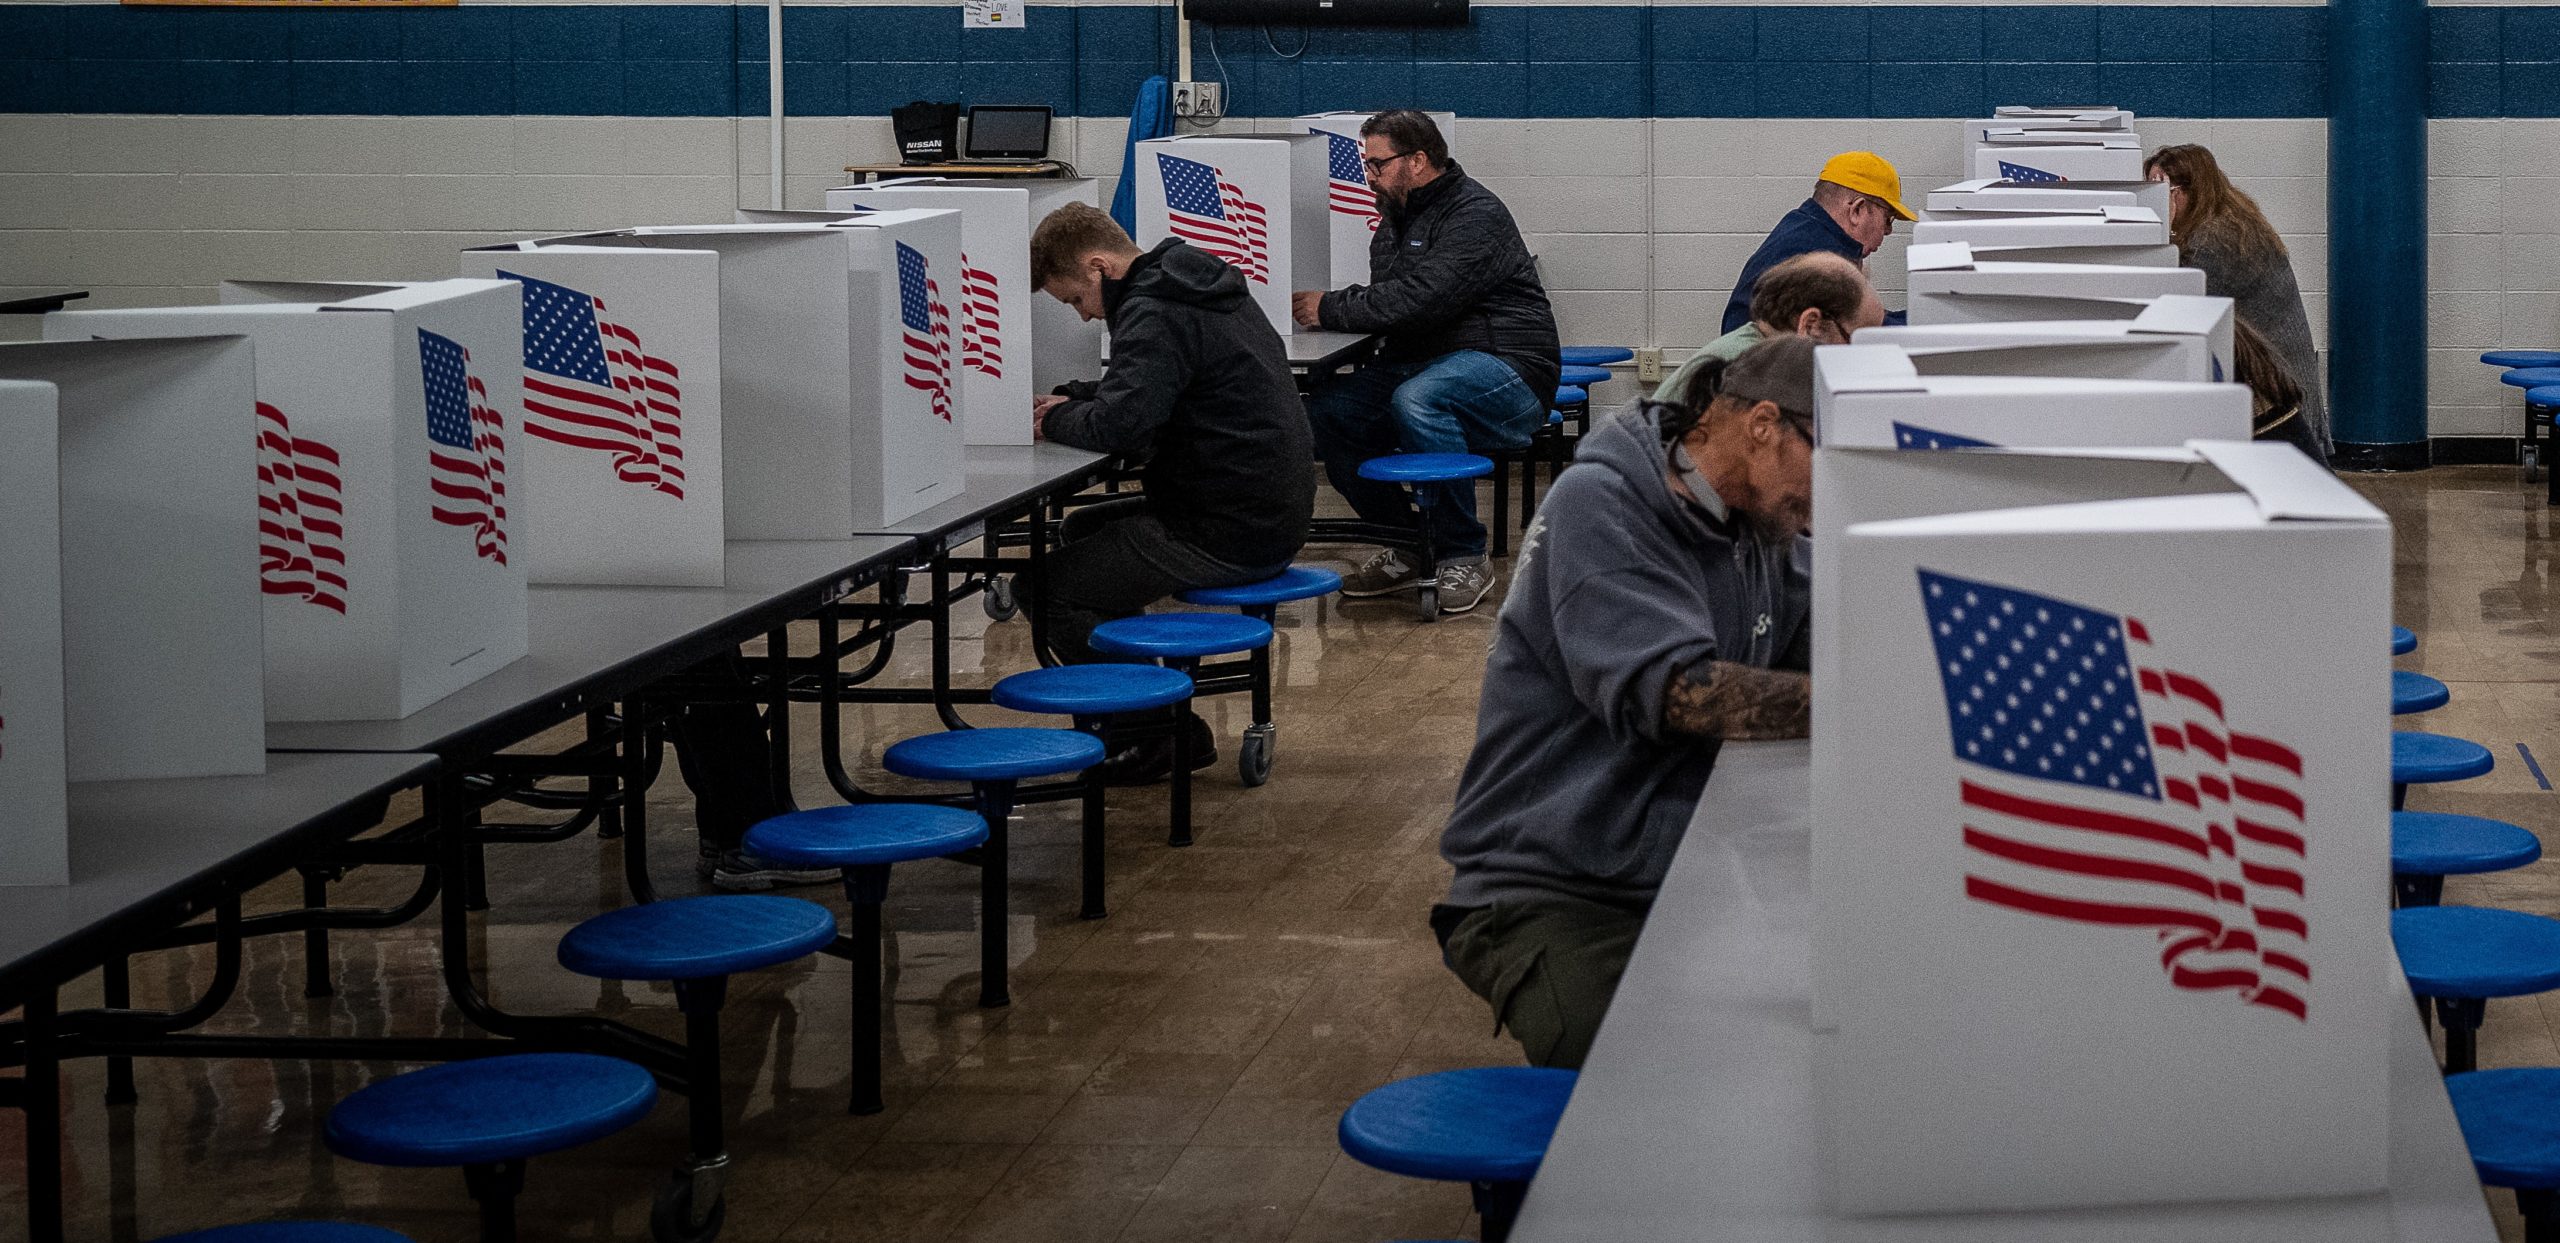 People sit at voting booths at a school.